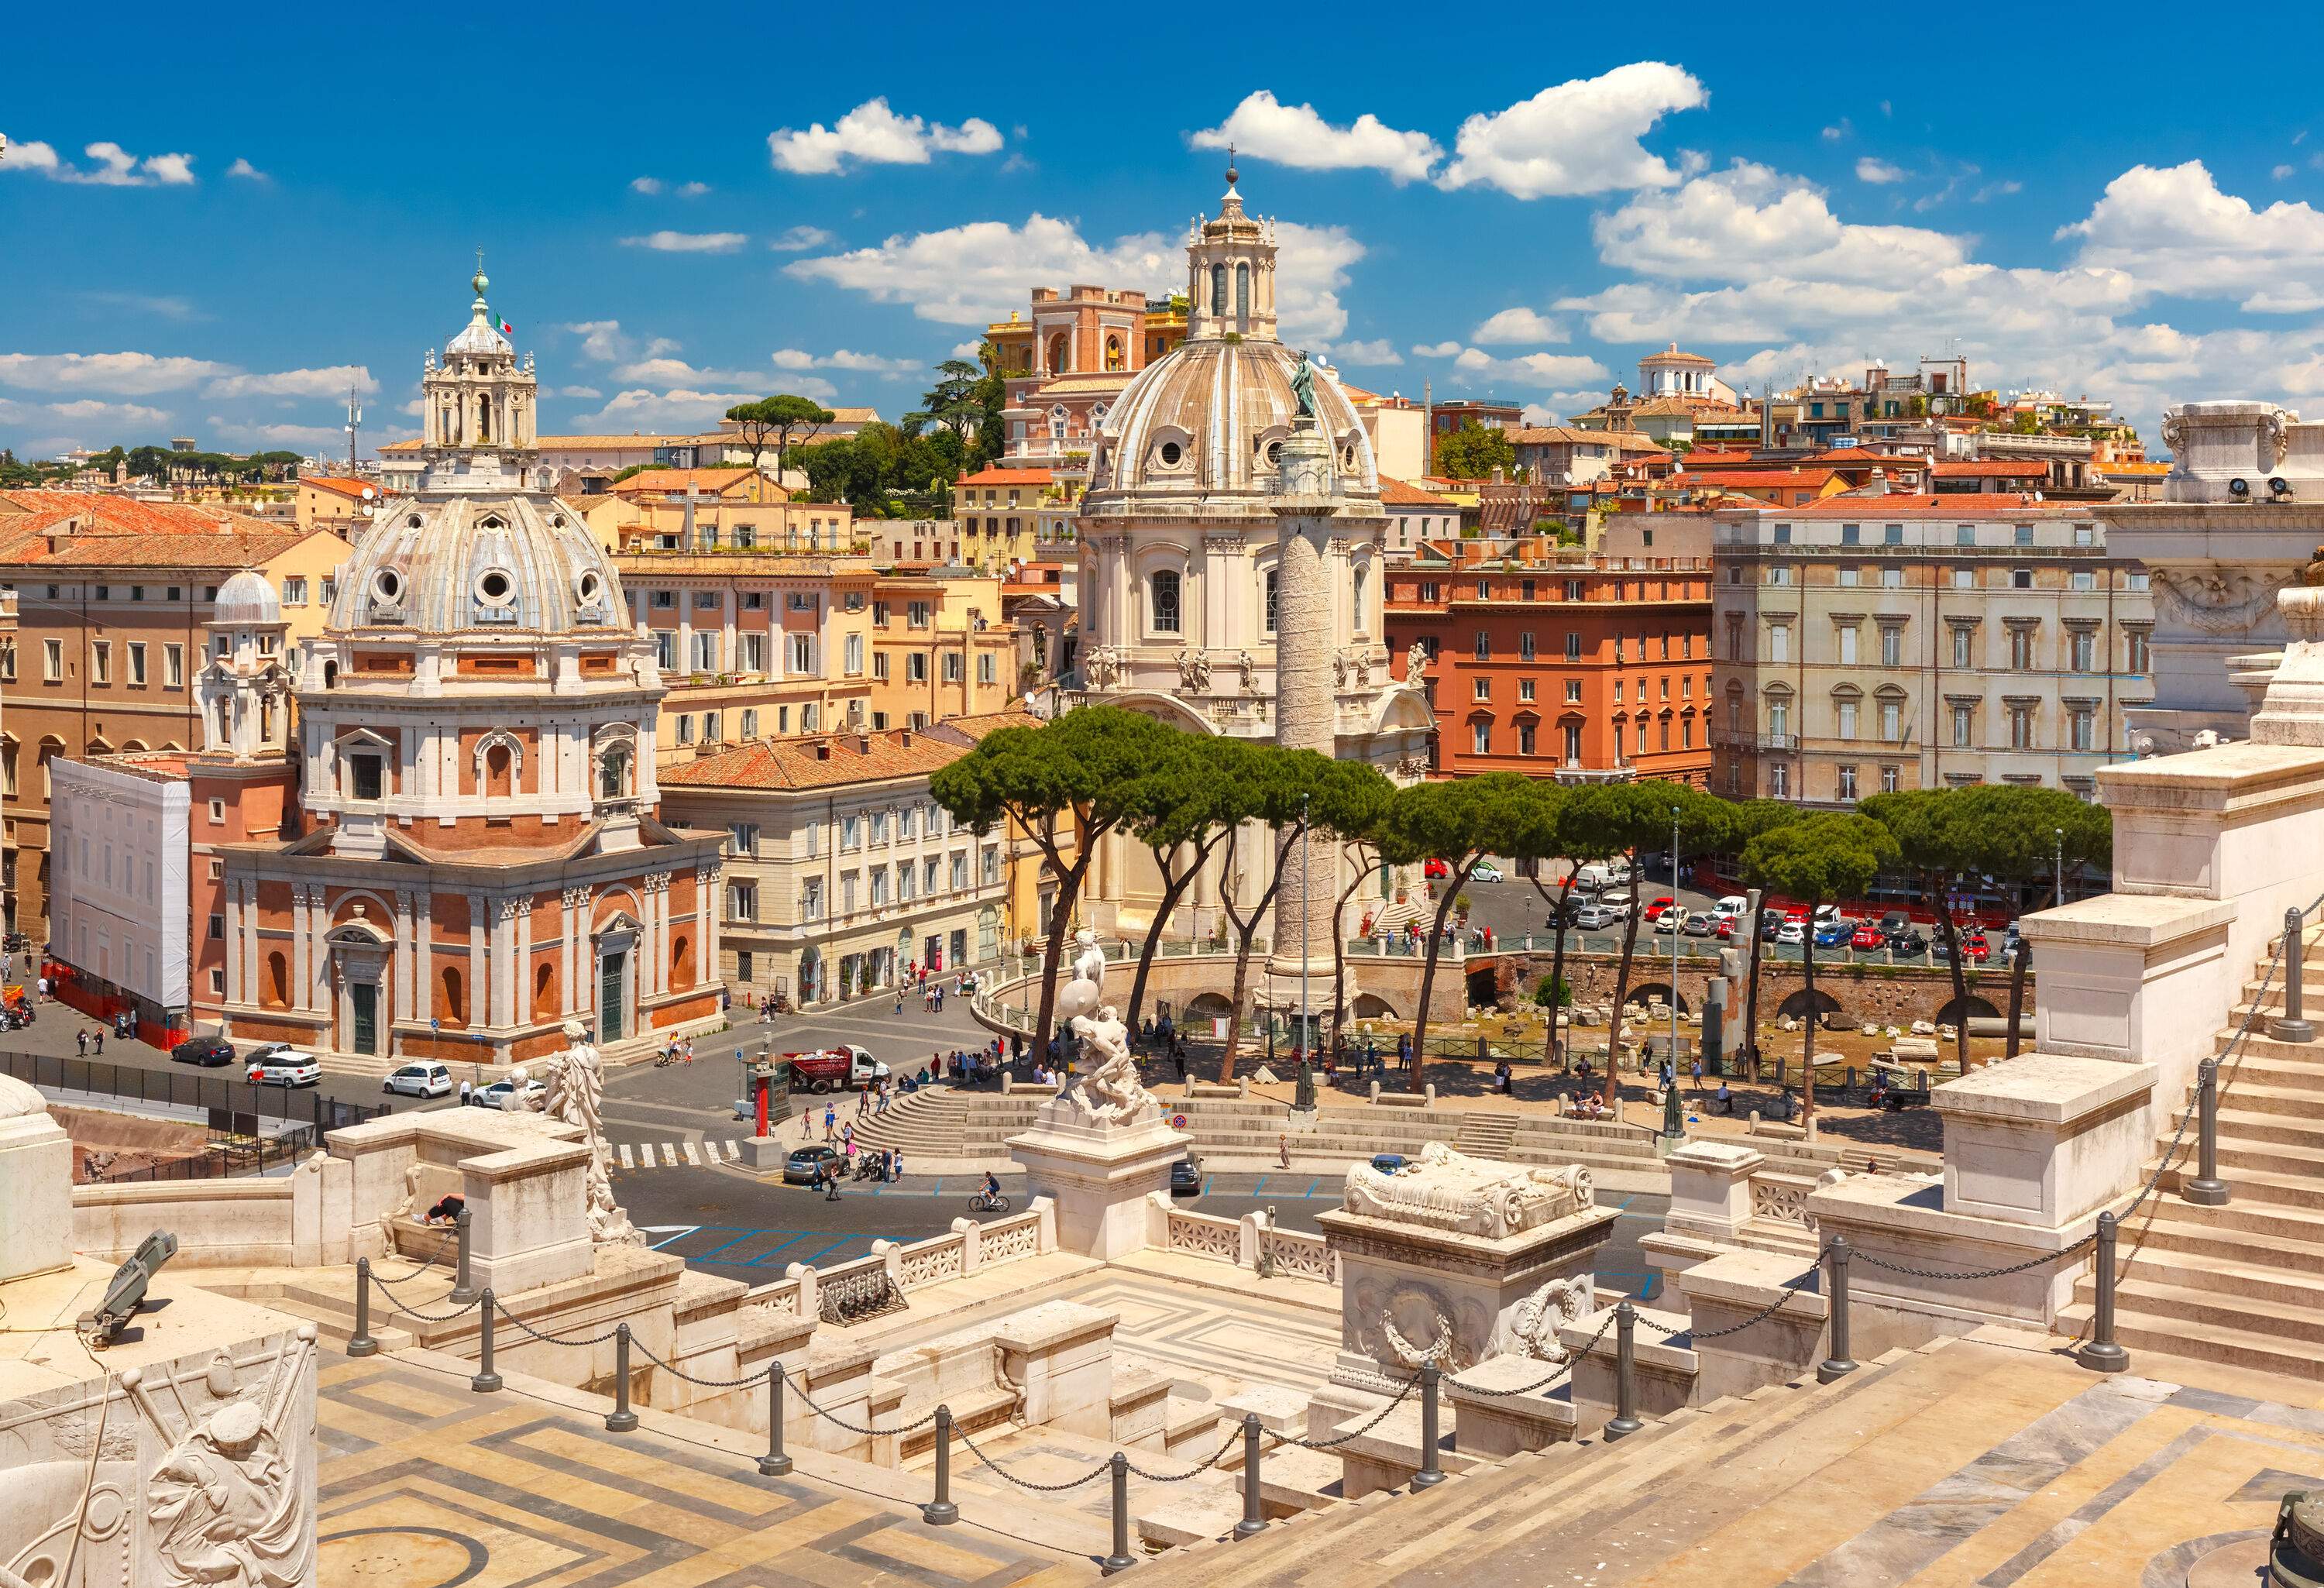 The Trajan's Column erects facing two gigantic dome churches surrounded by tall colourful buildings.